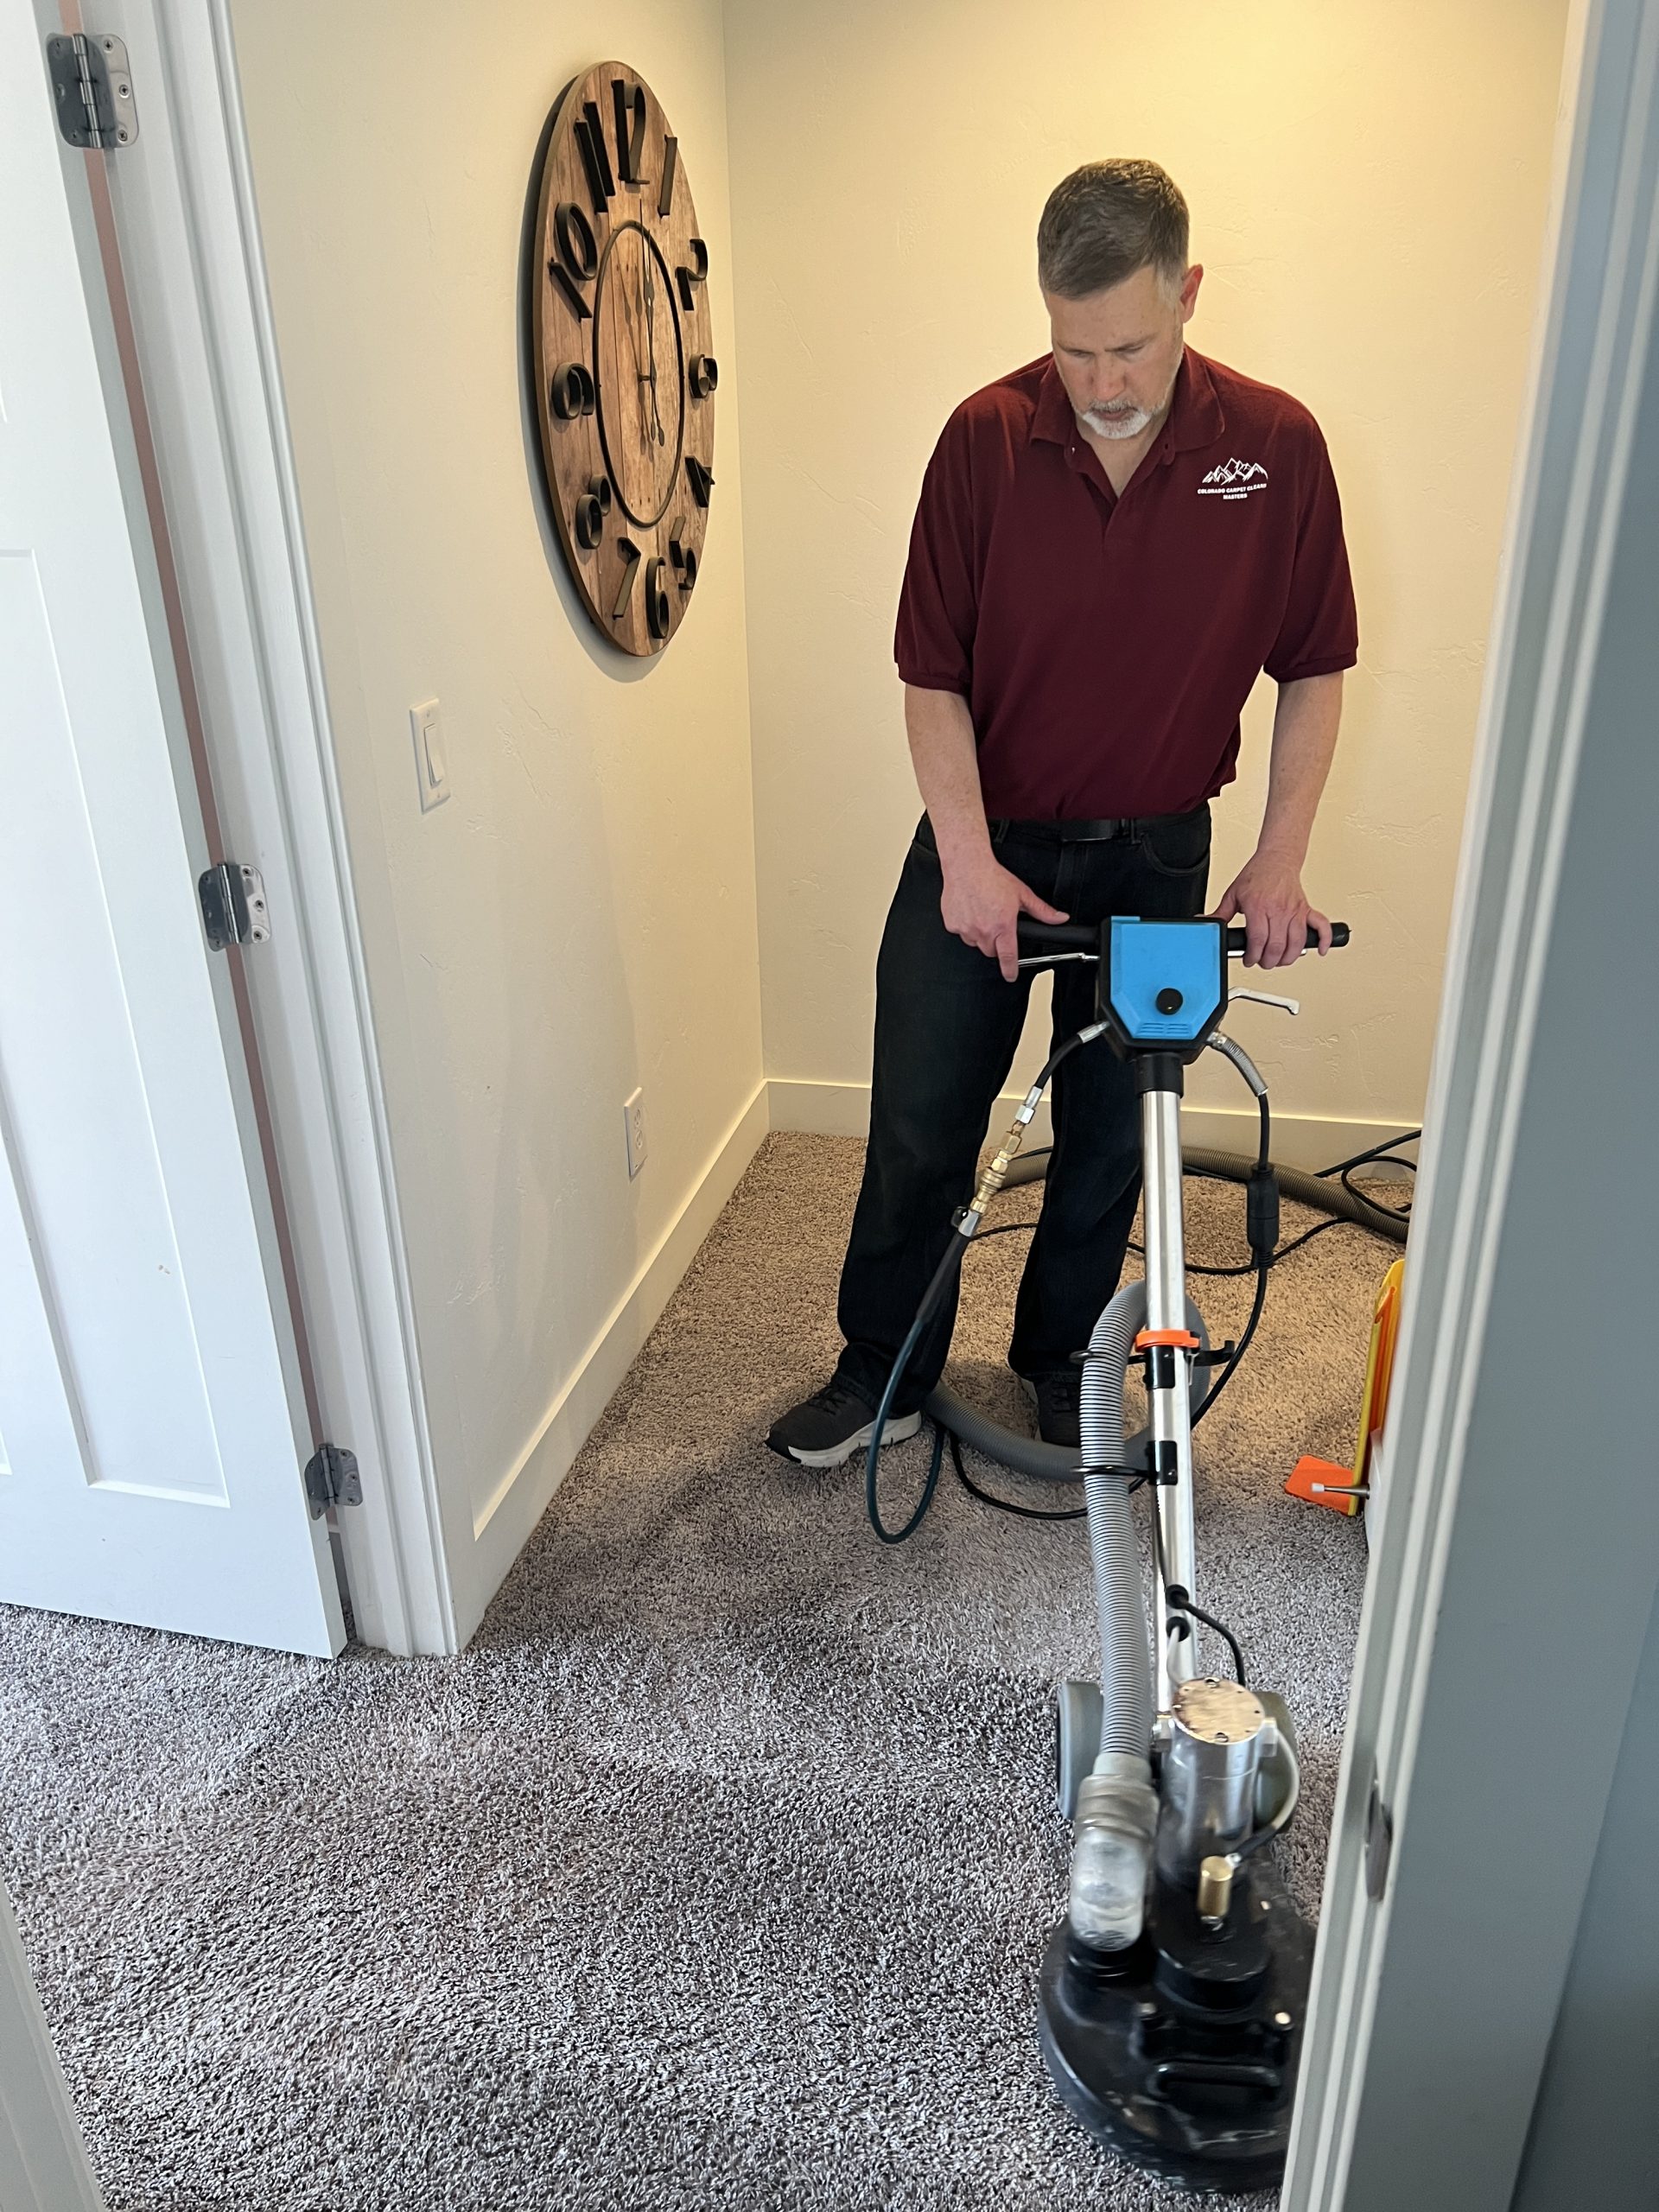 Carpet cleaning in Frederick CO with Colorado Carpet Masters deep cleaning method utilizing the T-Rex Power wand.